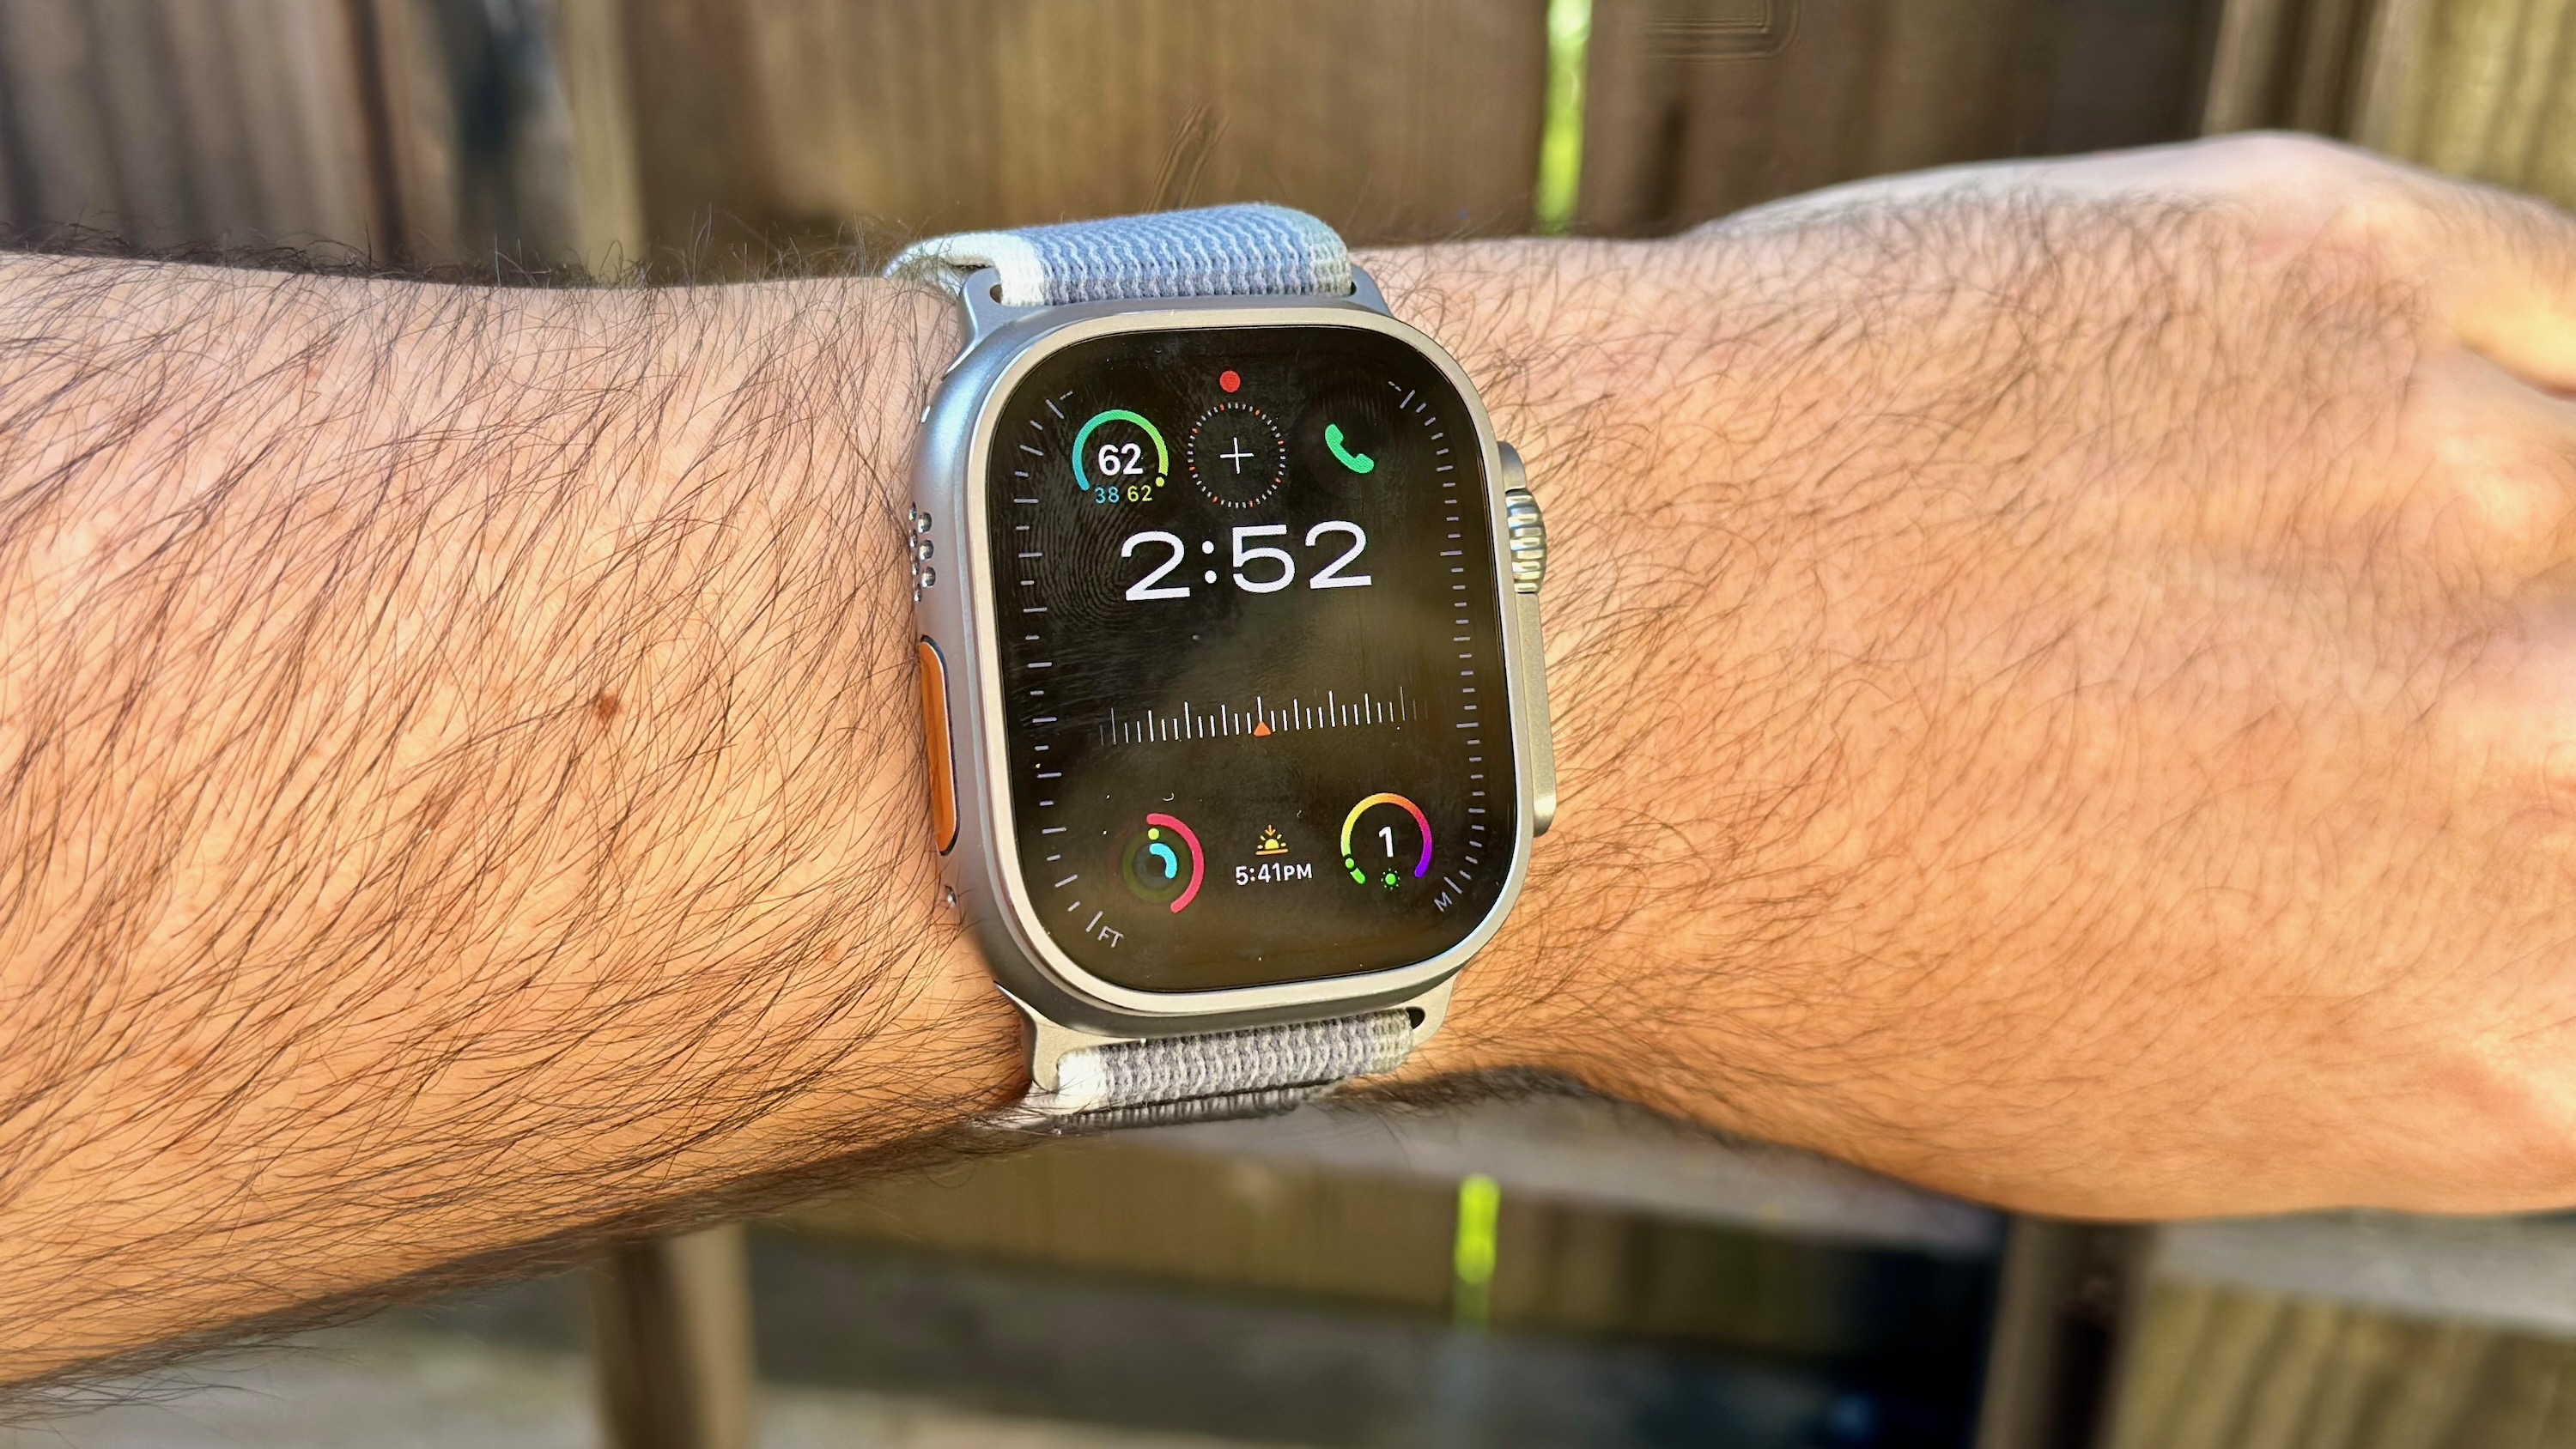 The Modular Ultra watch face on the Apple Watch Ultra 2